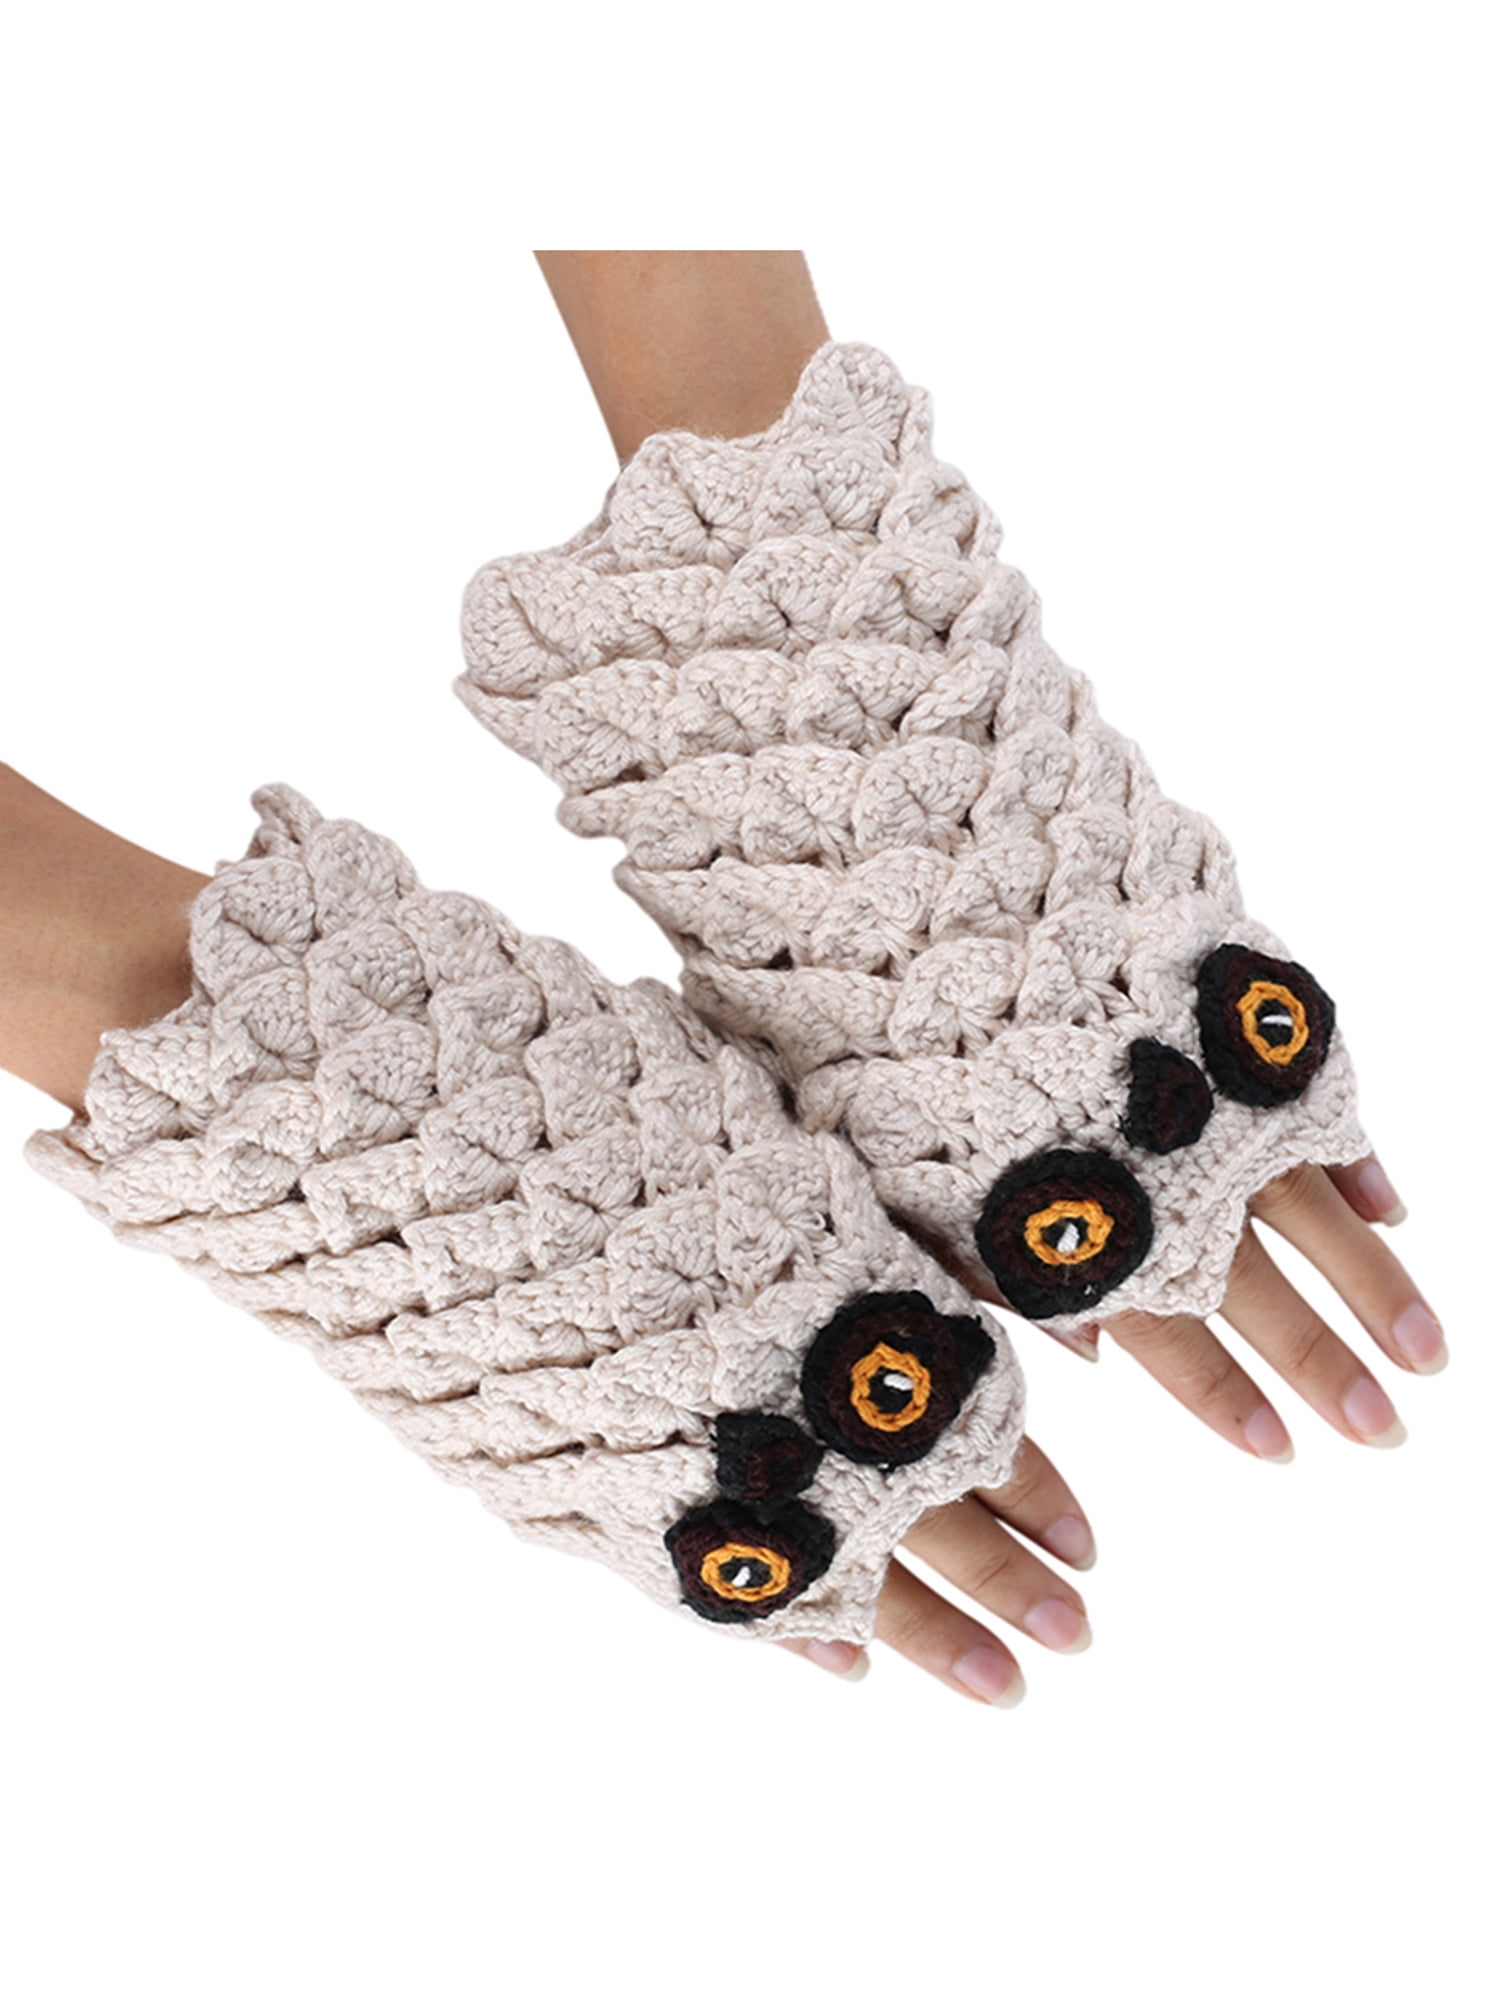 Kids Toddlers Owl Design Winter Gloves with Fingers Cover Convertible Flip Top Knitted Magic Gloves Stretchable Half Finger Wrist Mittens Warm for 1-3 Years Boys Girls Christmas 